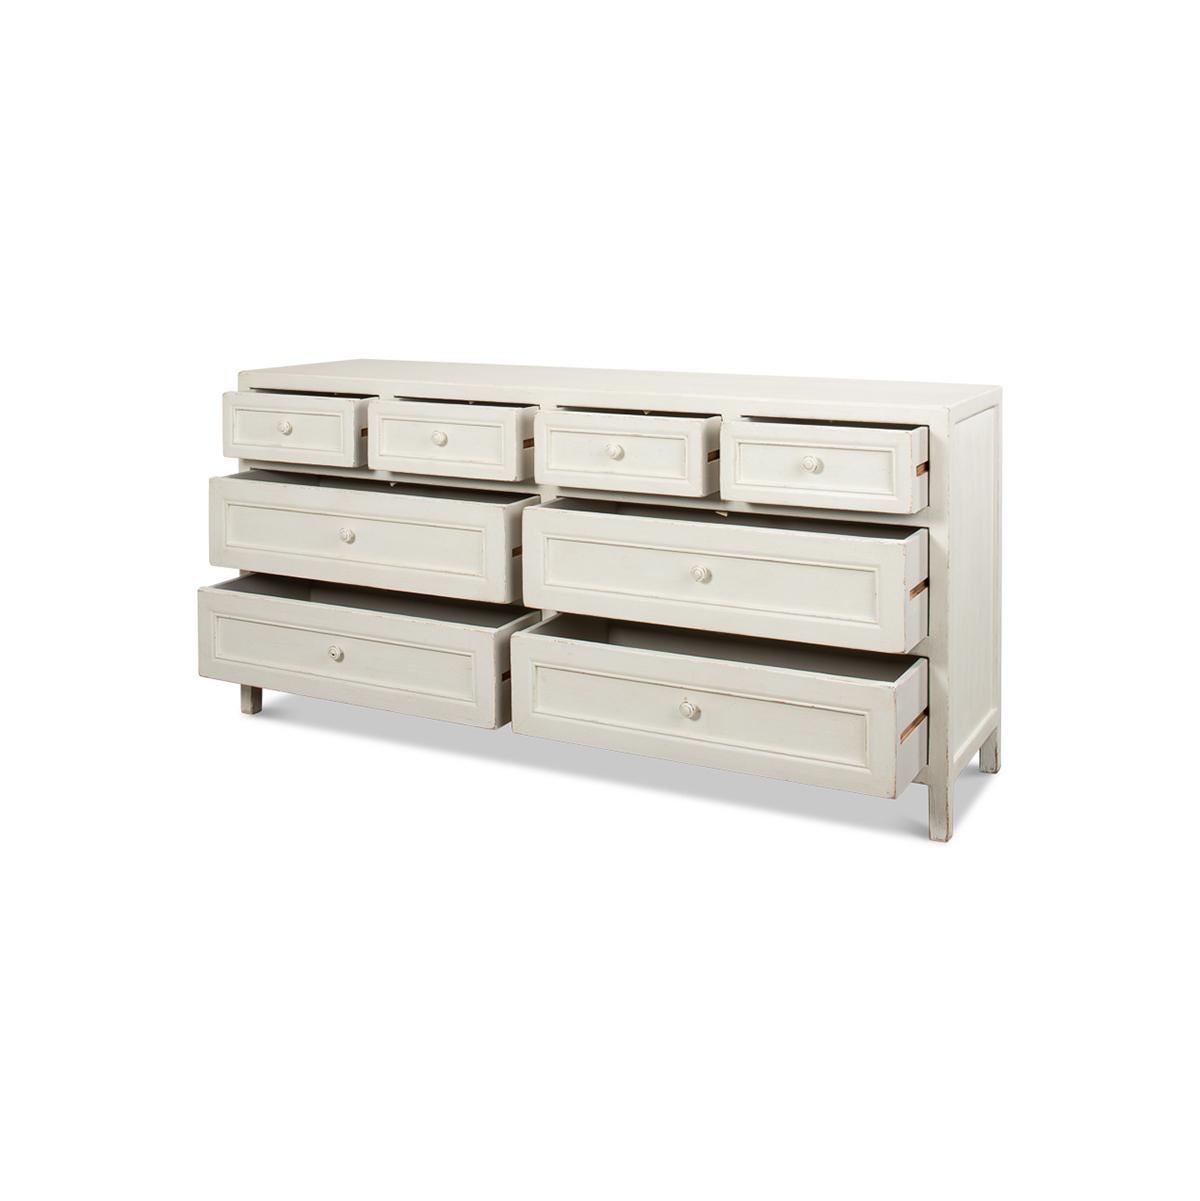 Chinese Export Antiqued White Rustic Painted Dresser For Sale